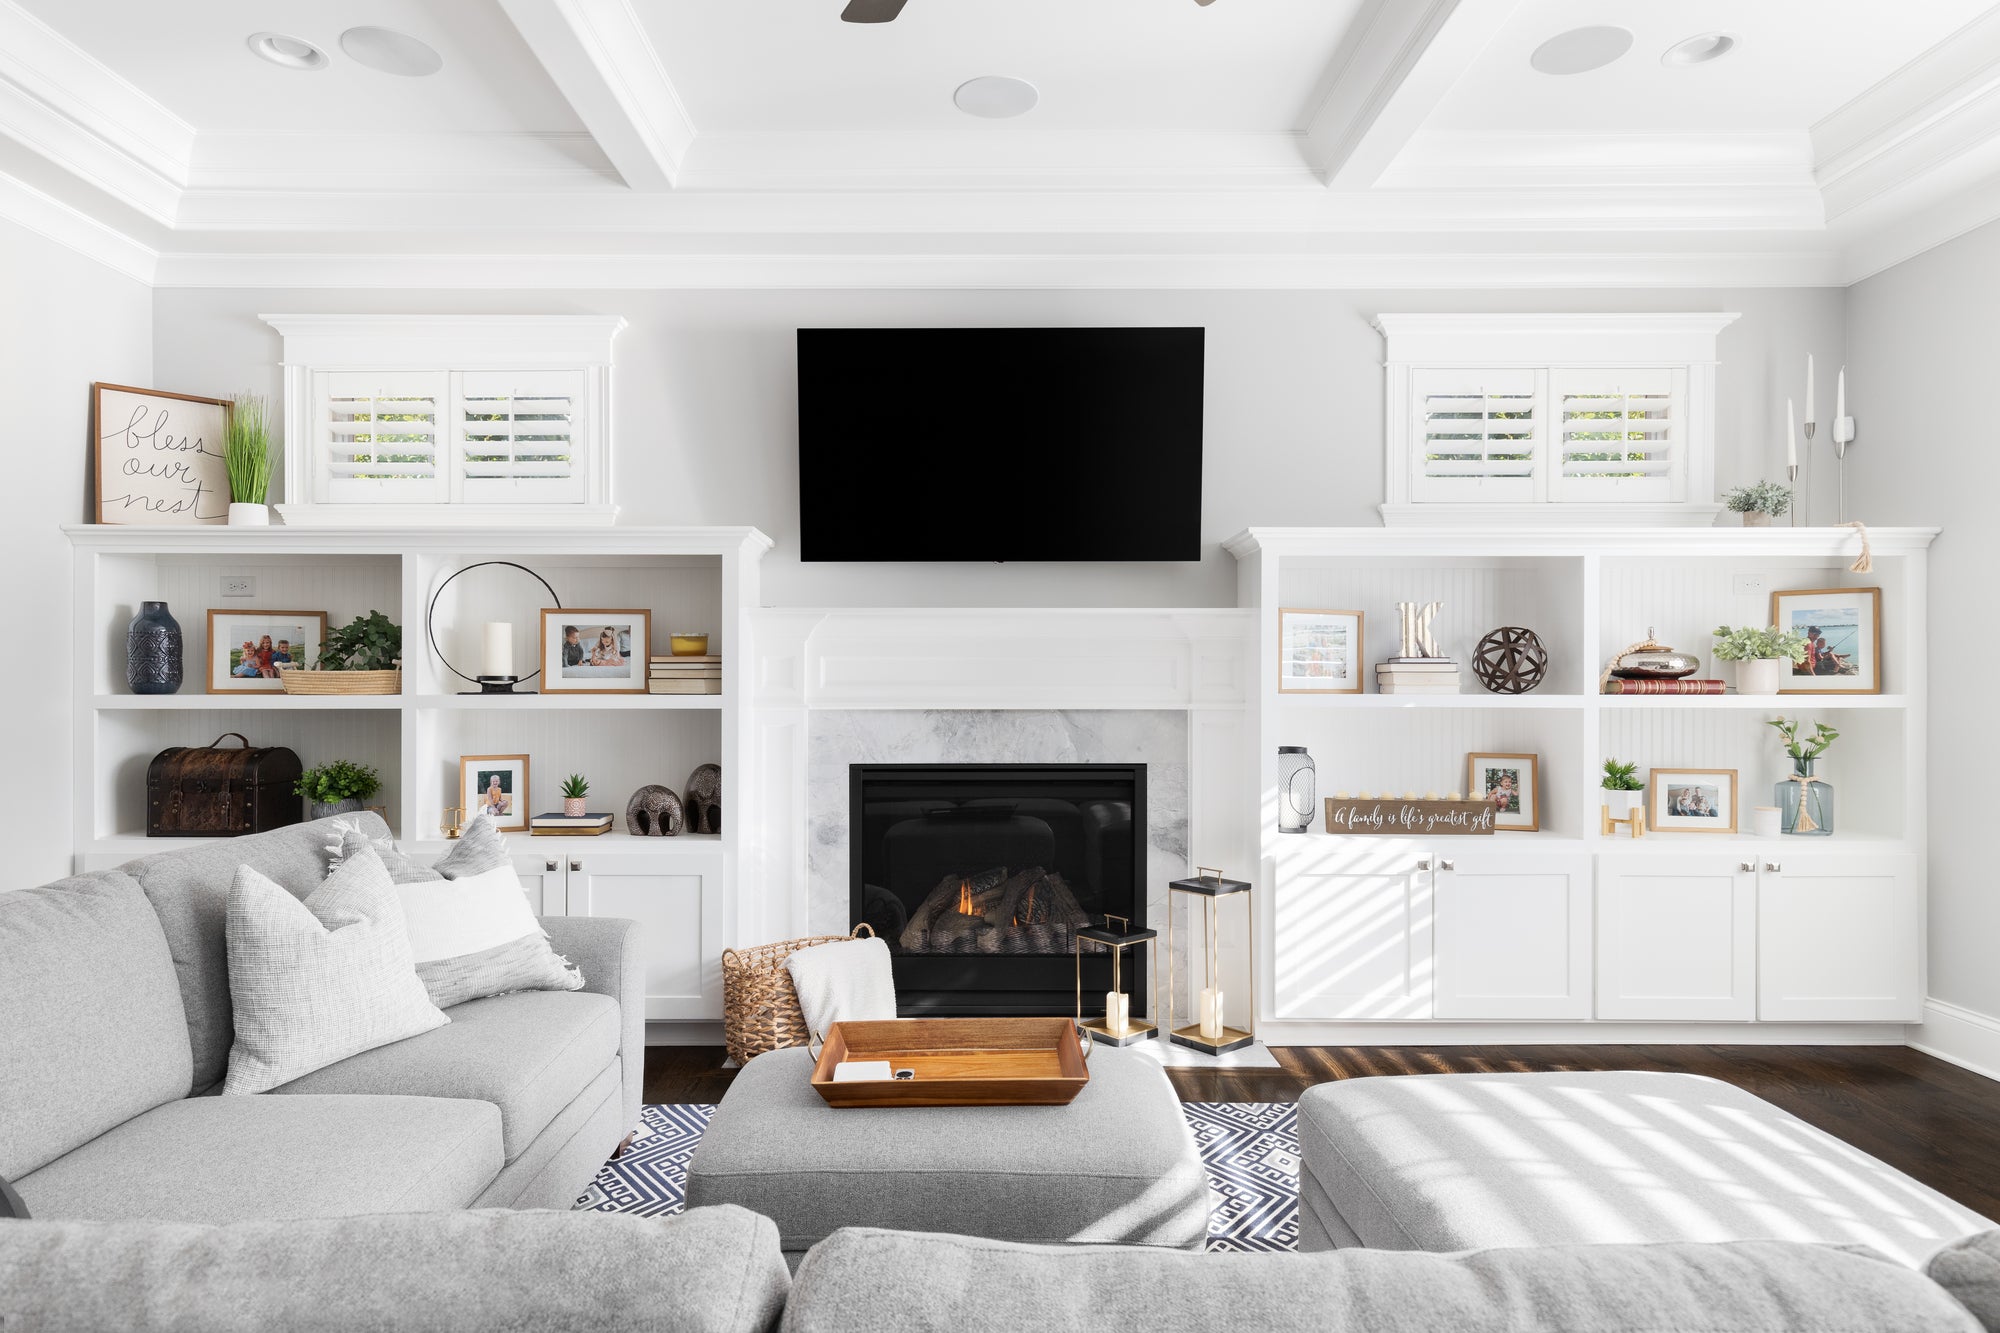 How To Hide Wall Mounted TV Cords Above a Fireplace Without an